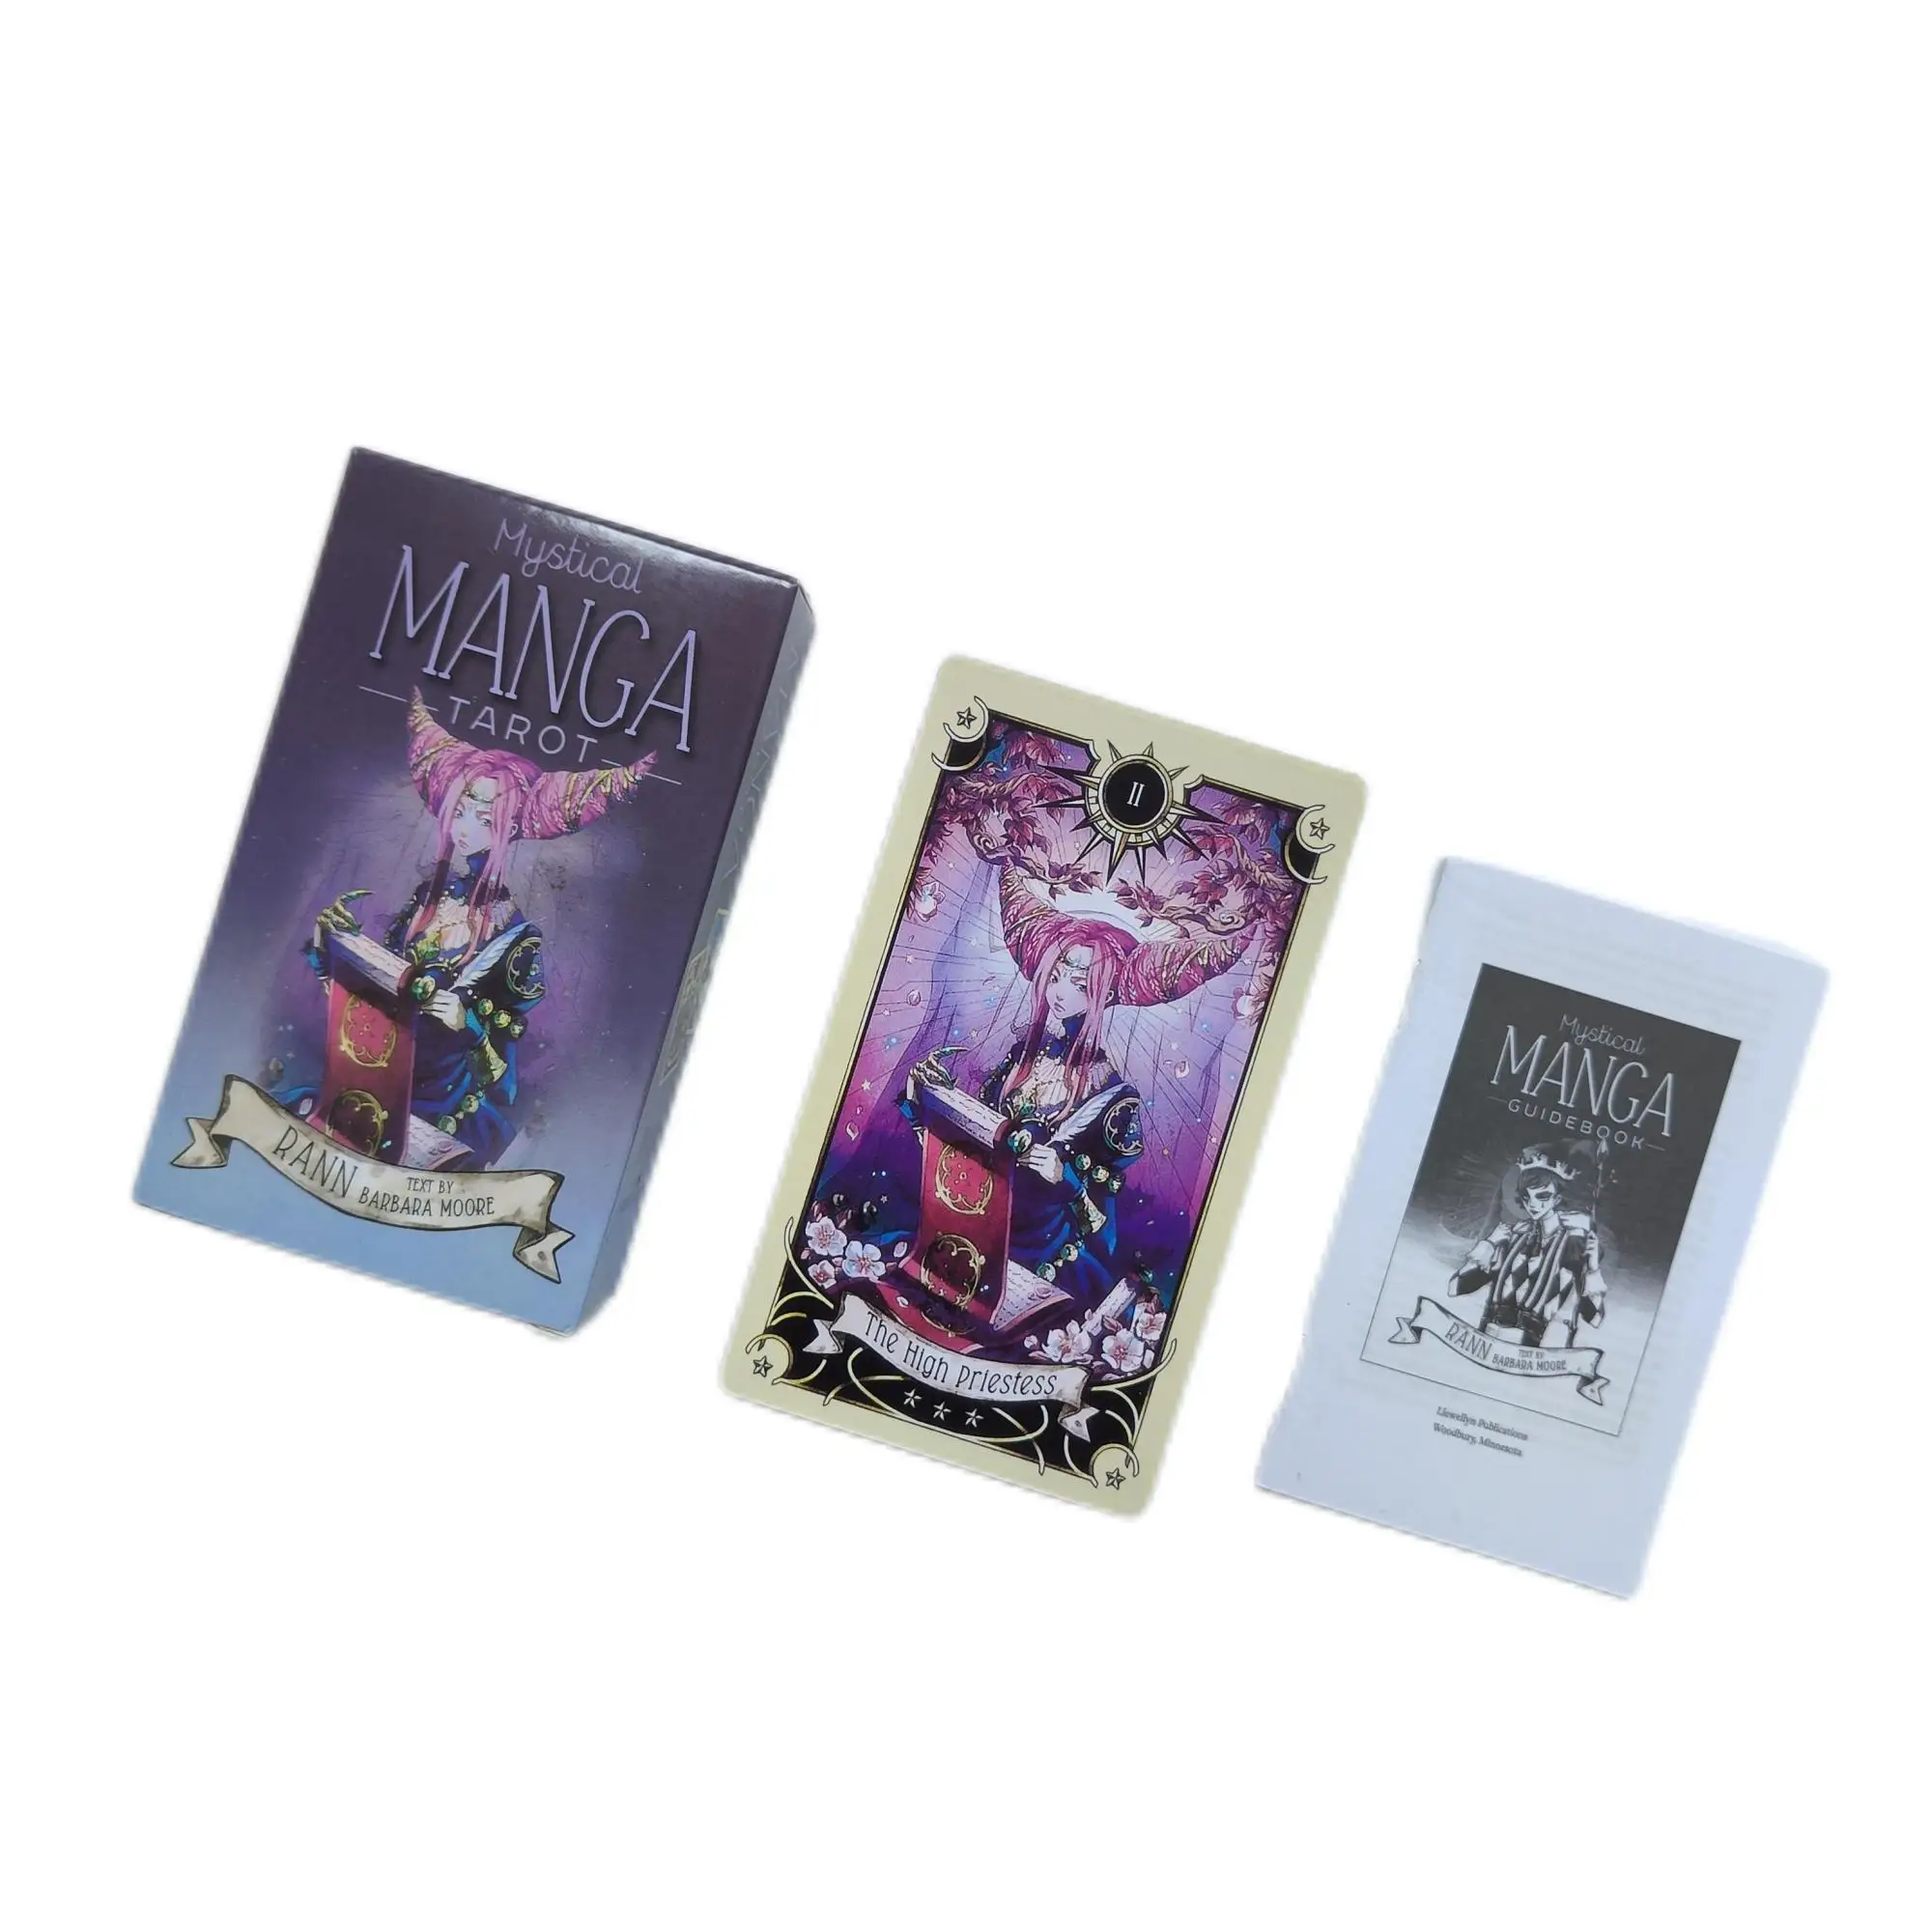 12x7cm Mystical Manga Tarot 78 Cards/Set With Guidebook Beautiful Design Style For Family Friends Holiday Gift Party Board Games